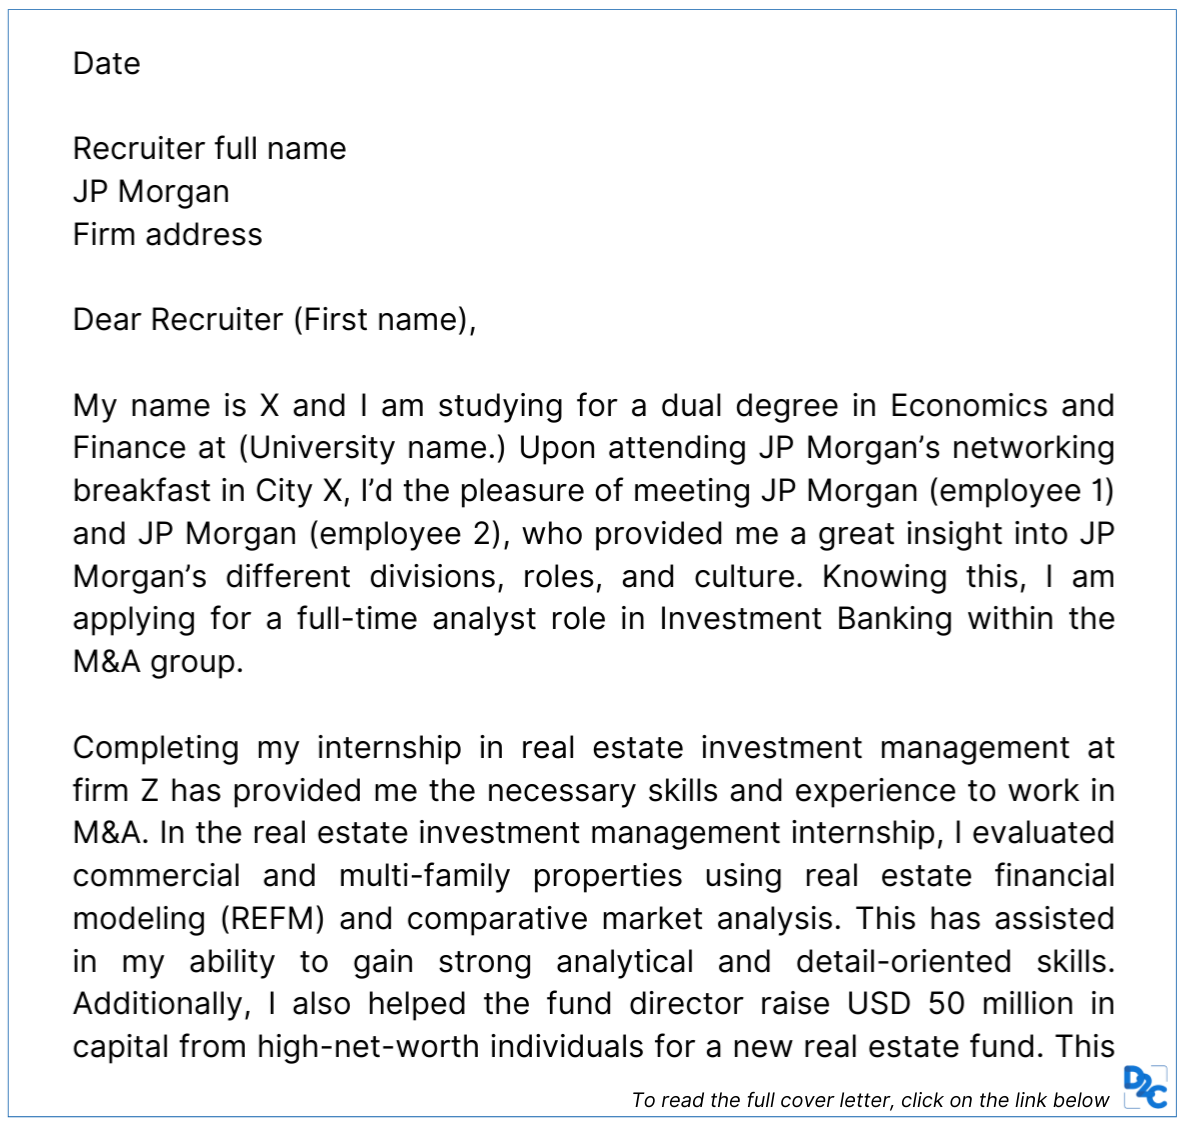 do you need a cover letter for jp morgan